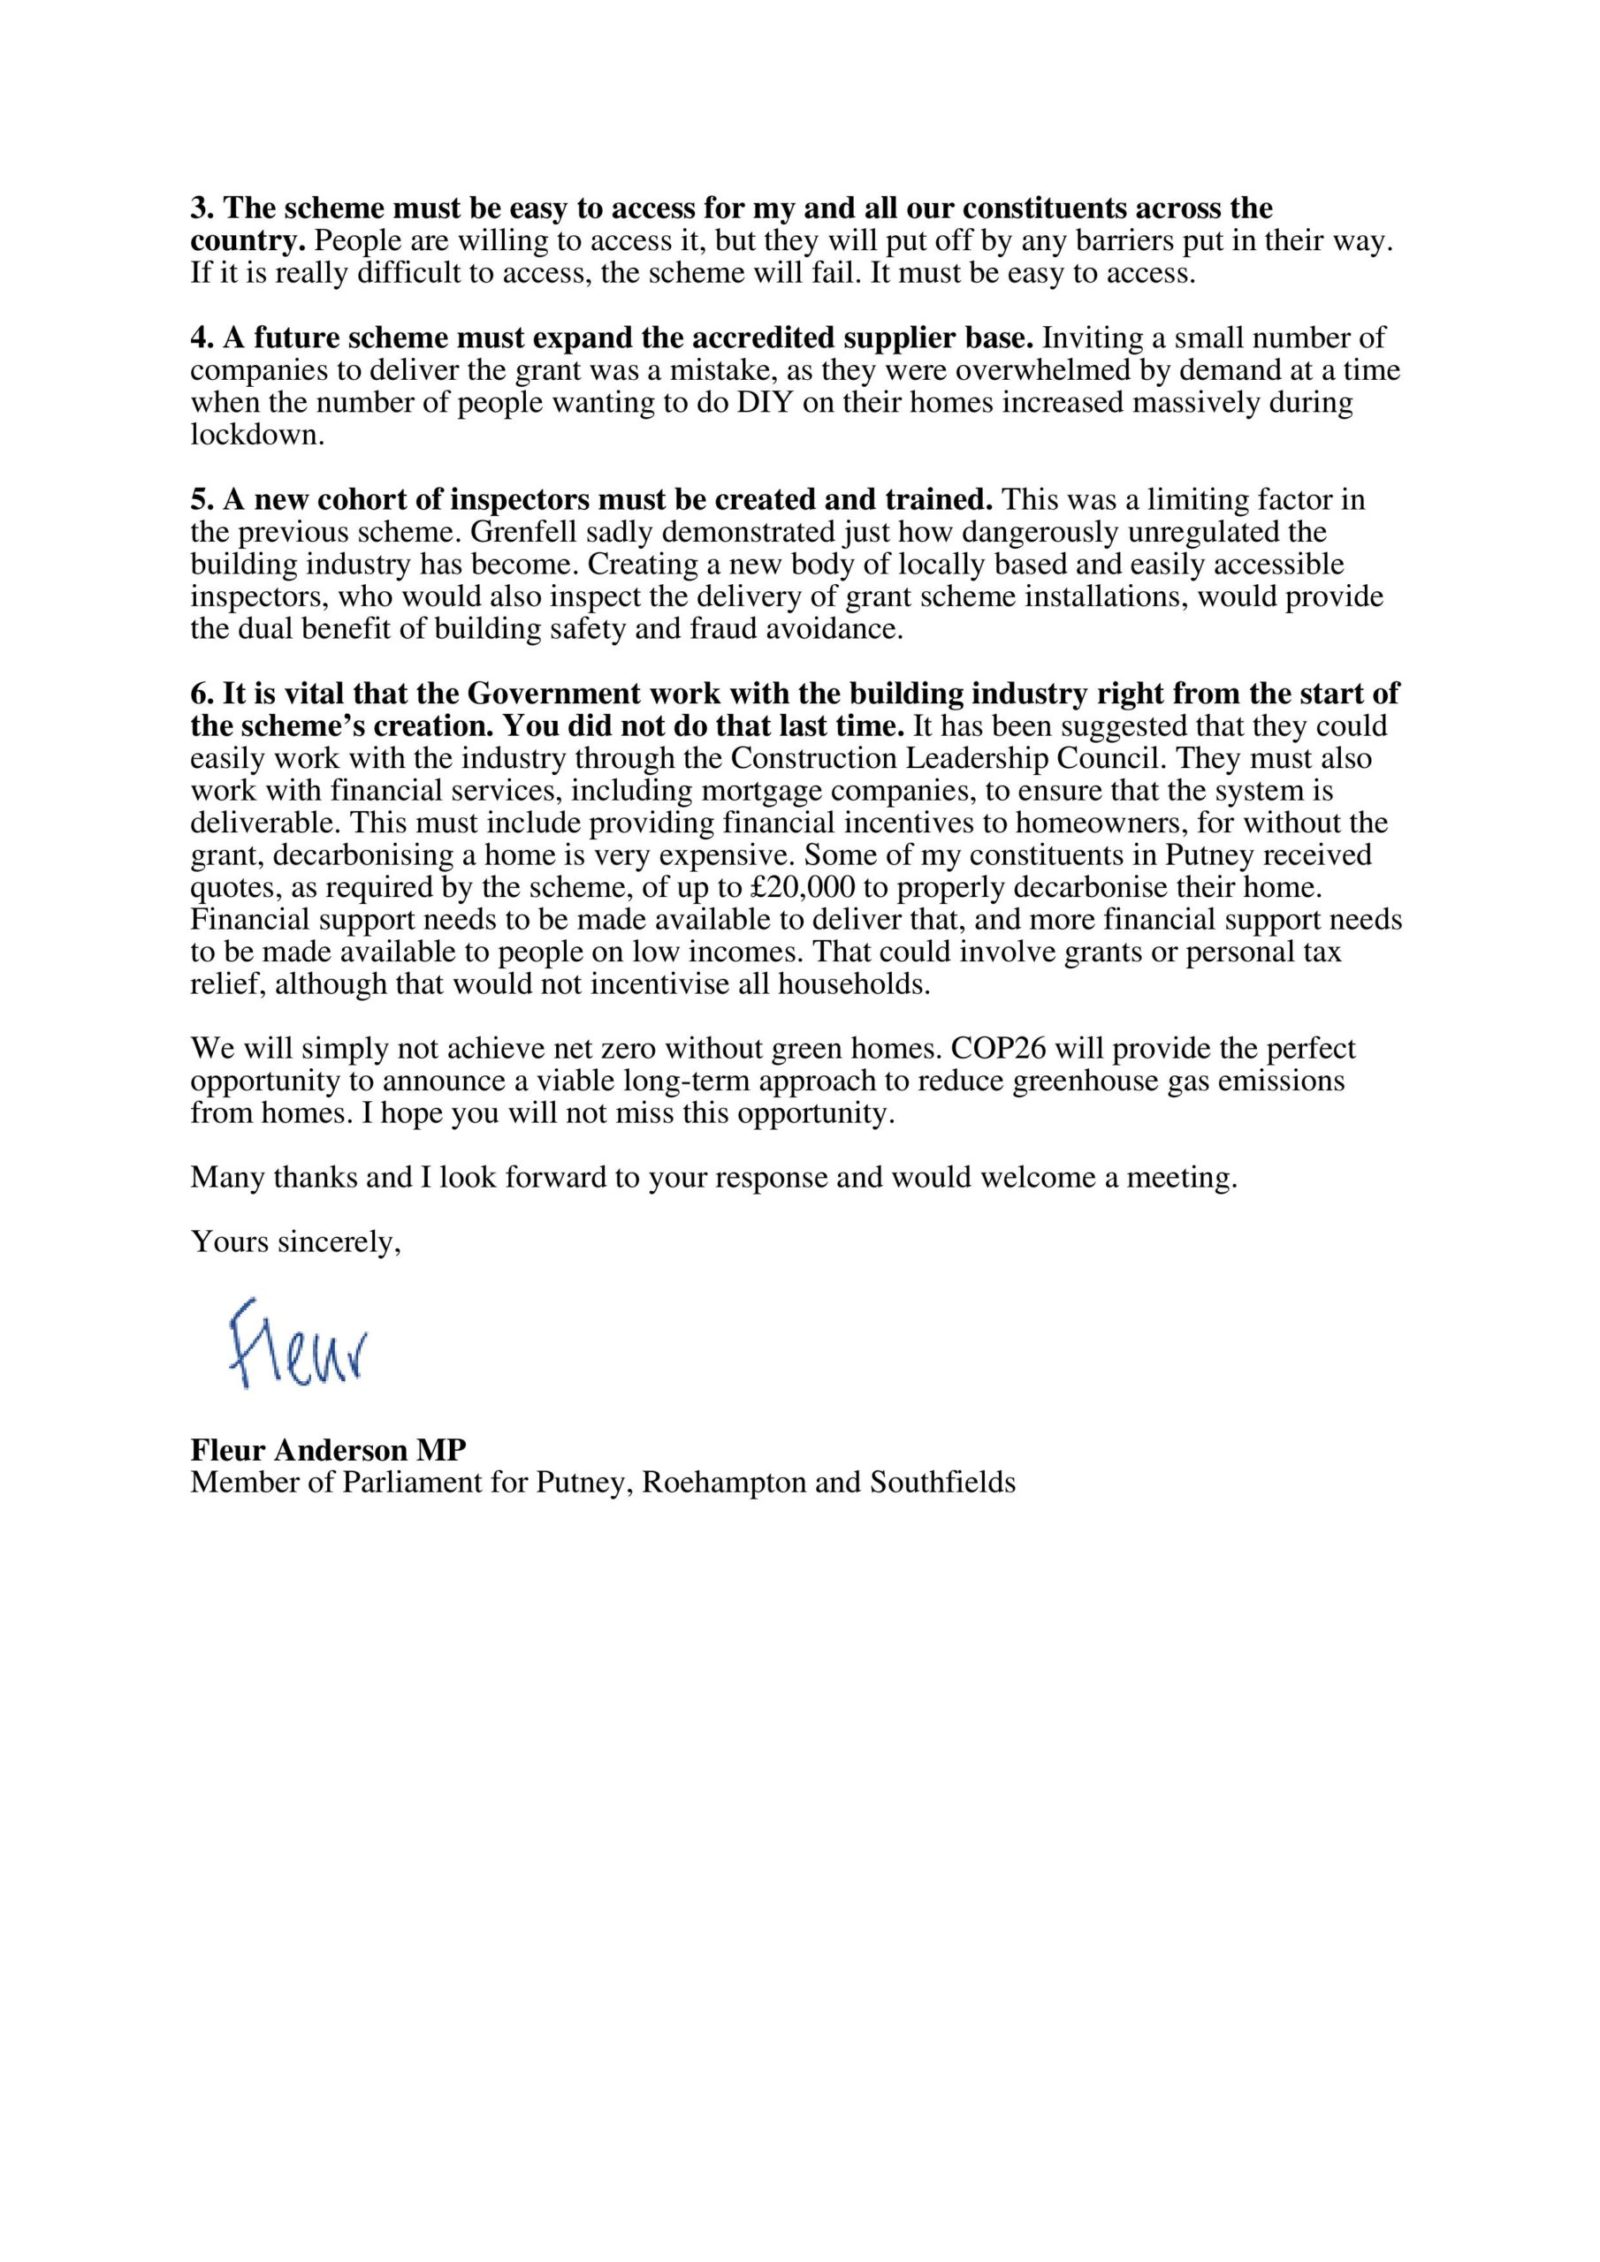 Letter to Secretary of State about the Green Homes Grant